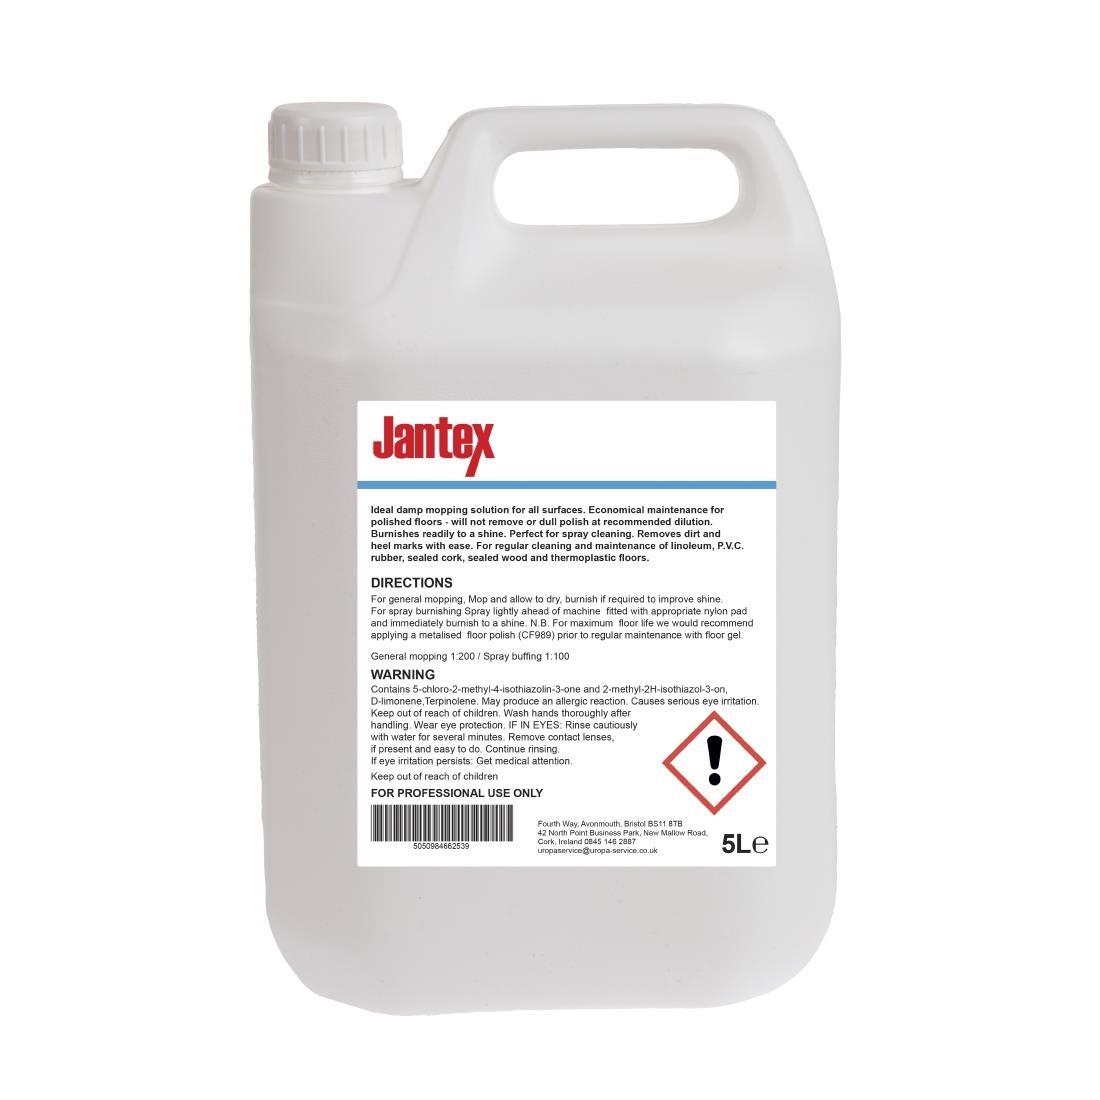 Jantex Neutral Floor Cleaner Concentrate 5Ltr - CK946  - 2